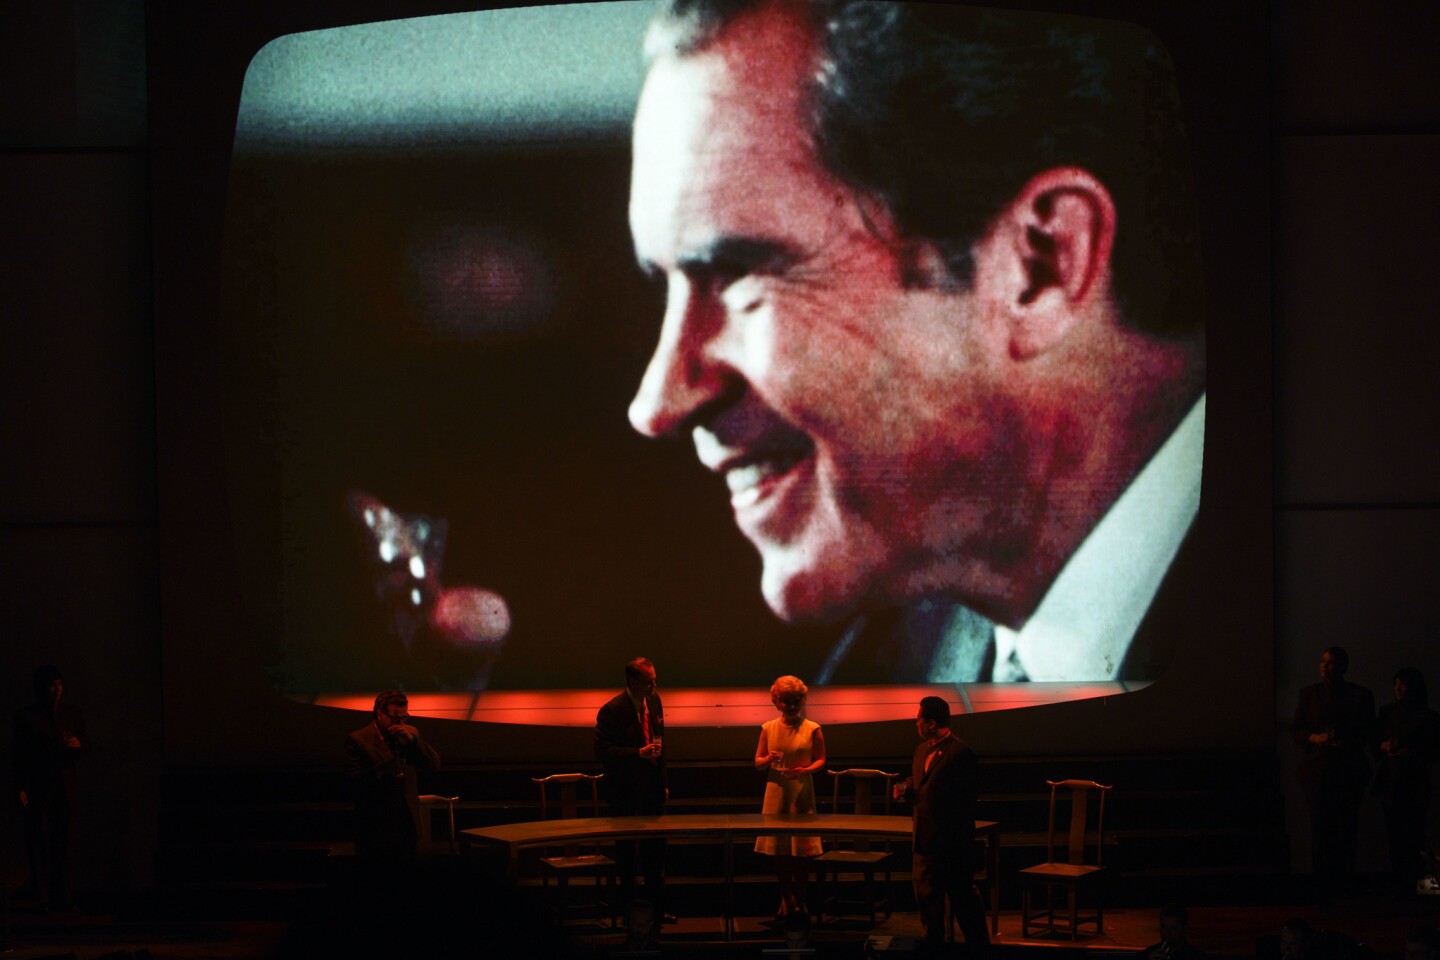 Ryan McKinny as Richard Nixon, left, Joélle Harvey as Pat Nixon, center right, John Matthew Myers as Mao, right, and Peter Coleman-Wright, left, perform with the L.A. Philharmonic as a large projection screen shows TV footage from China in a performance of "Nixon In China" at the Walt Disney Concert Hall on March 3, 2017, in Los Angeles.